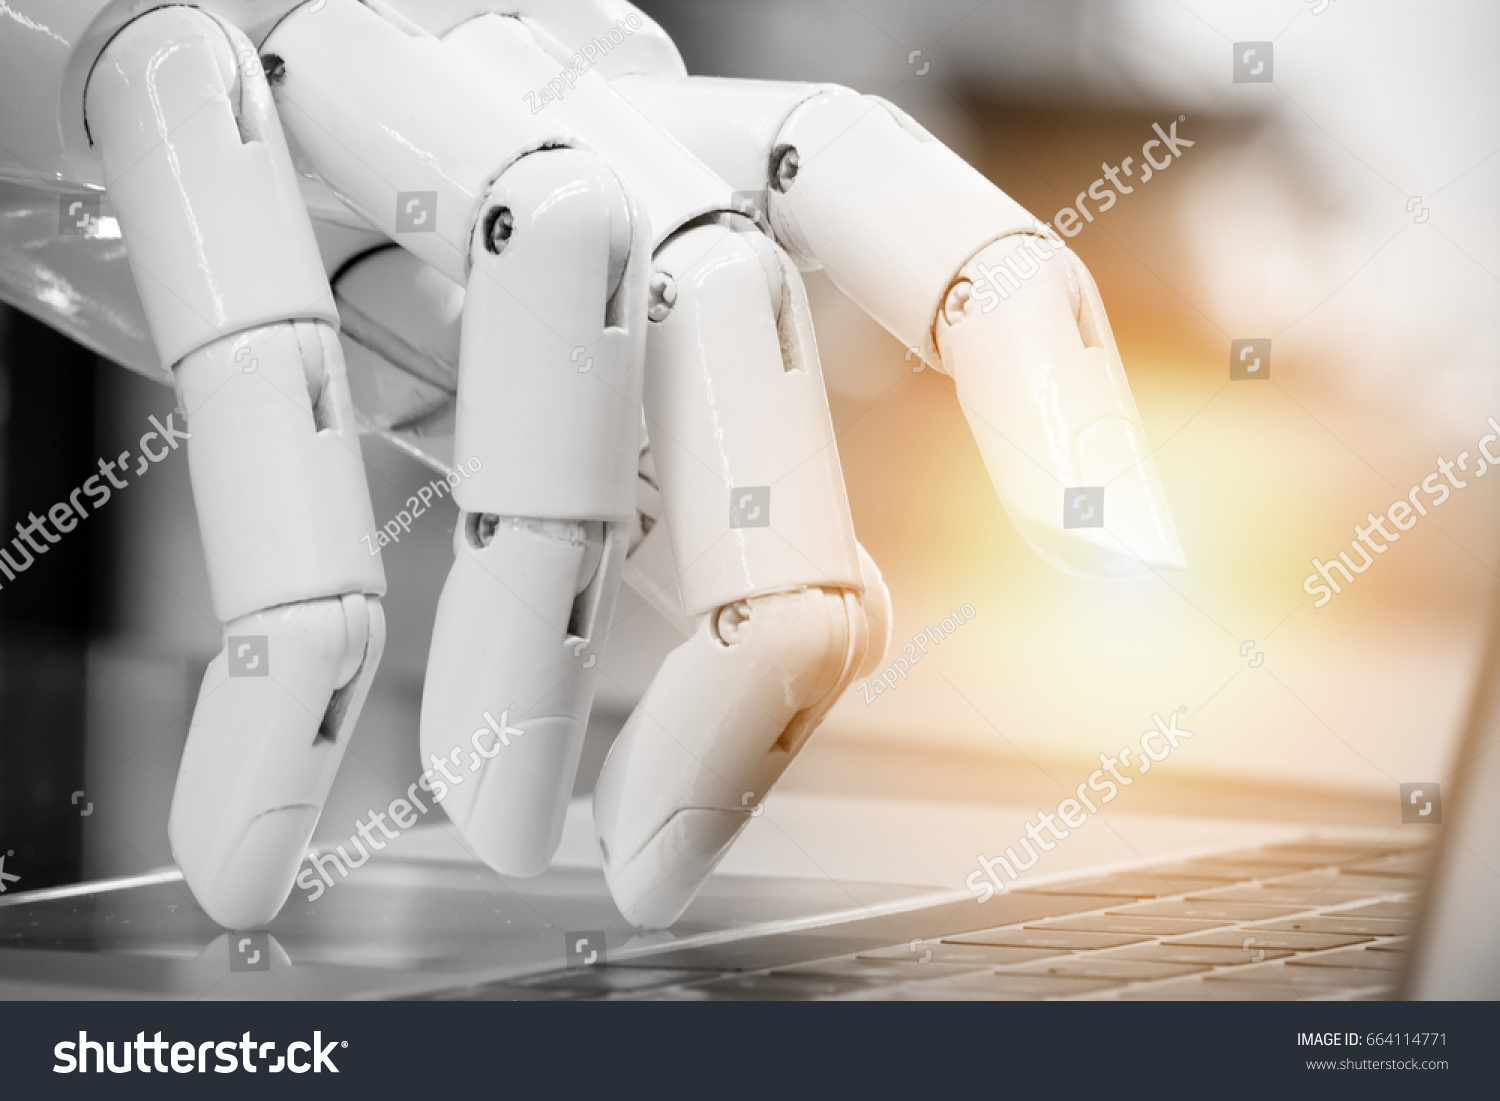 Robotic , artificial intelligence , robo advisor , chatbot concept. Robot finger point to laptop button with flare light effect. #664114771